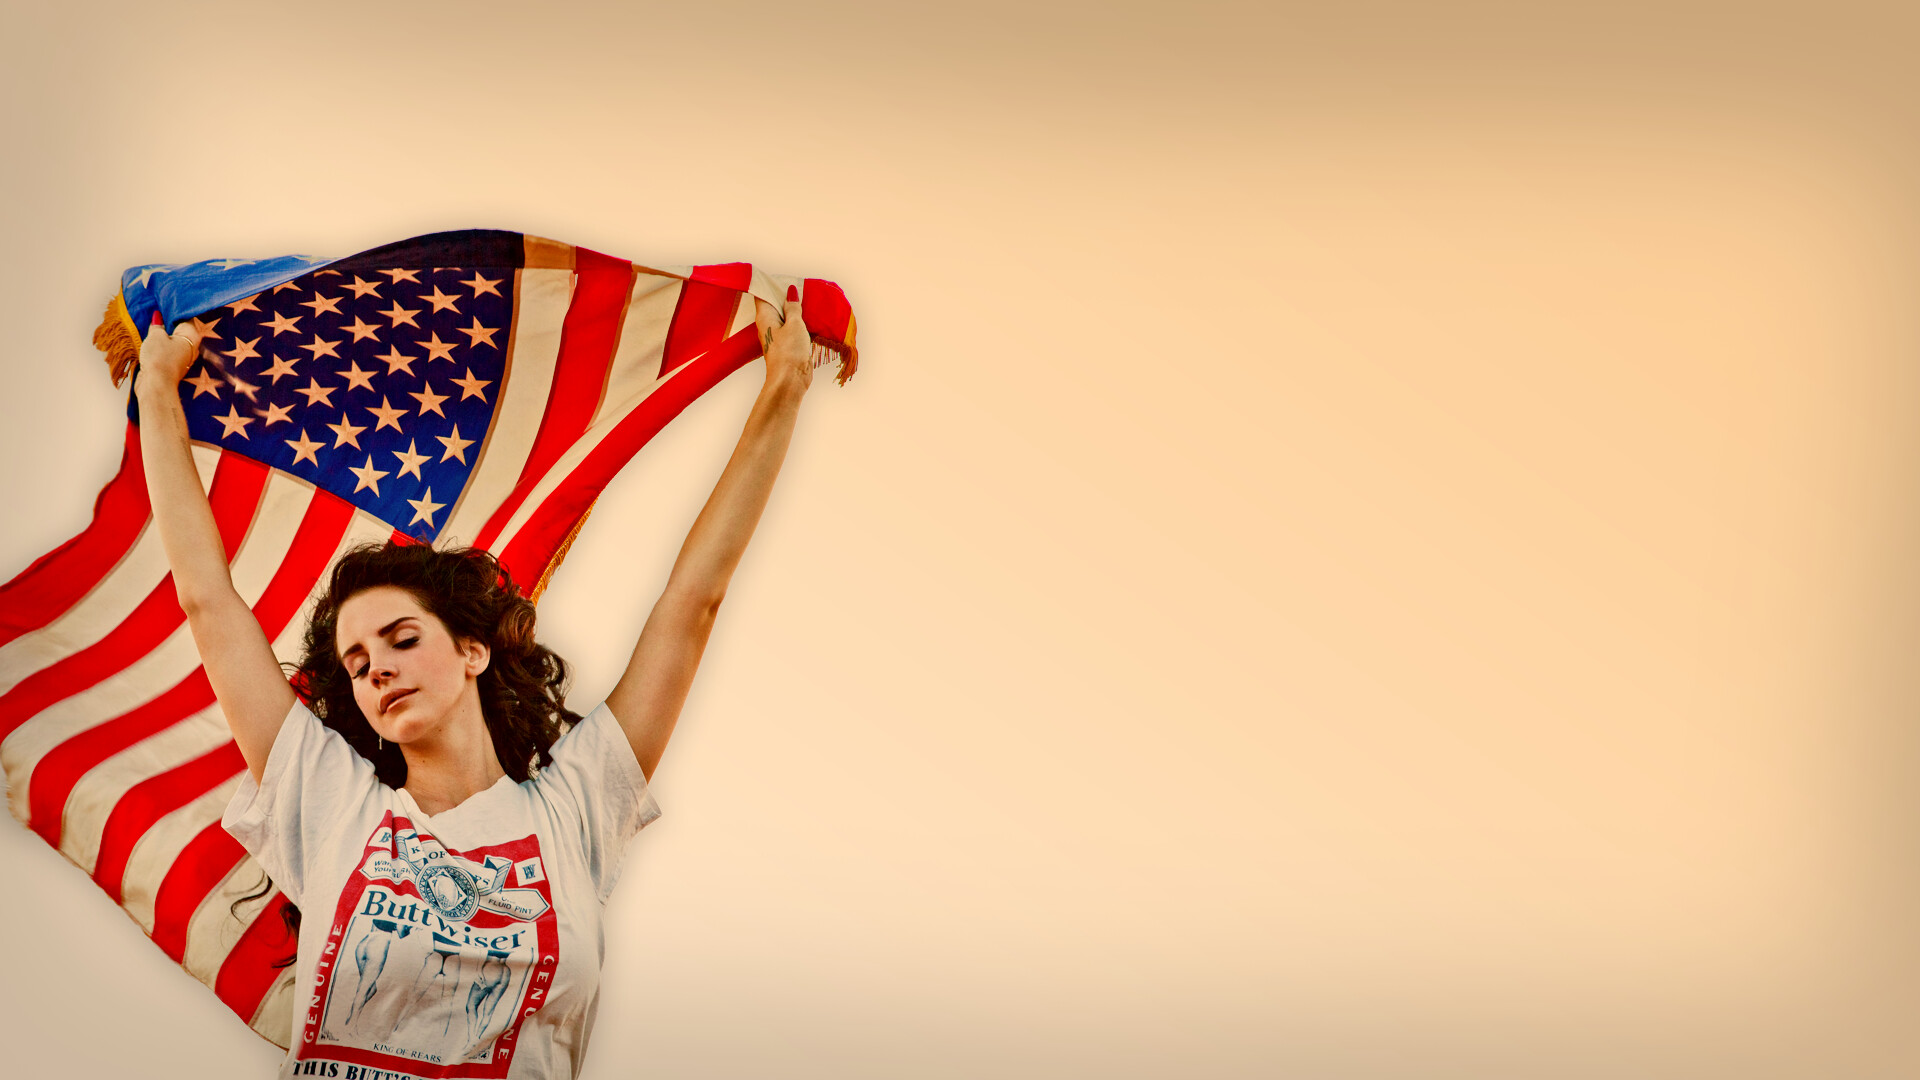 Lana Del Rey: A trademark of incorporating nostalgia of America's past into her emotive songwriting. 1920x1080 Full HD Wallpaper.